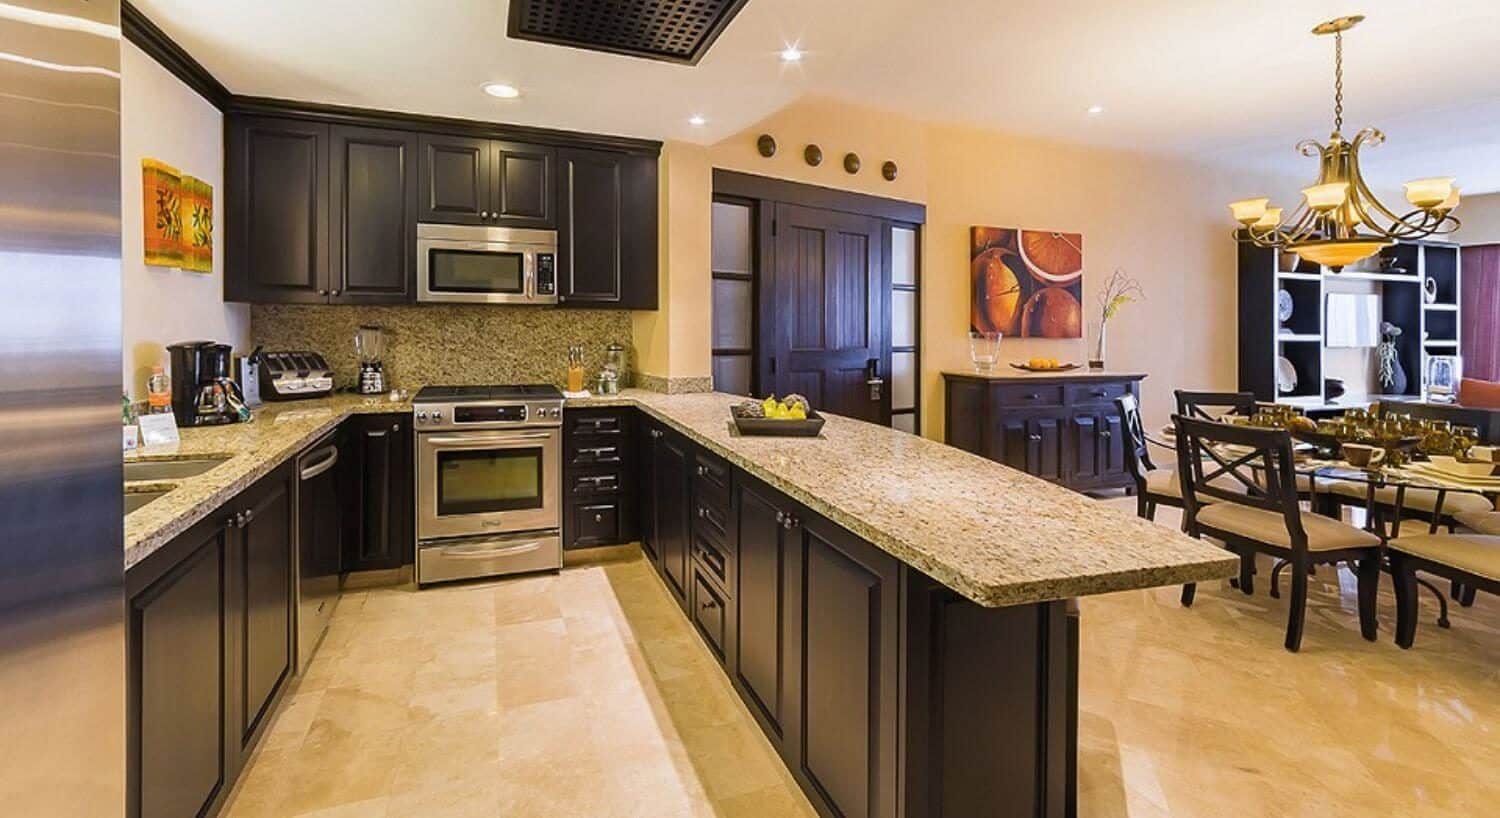 A U-shaped kitchen with stainless steel appliances, rich dark cupboards, granite countertops, a round glass dining table and plush chairs, a sideboard to match, and an entertainment center with flat-screen TV in the living room.